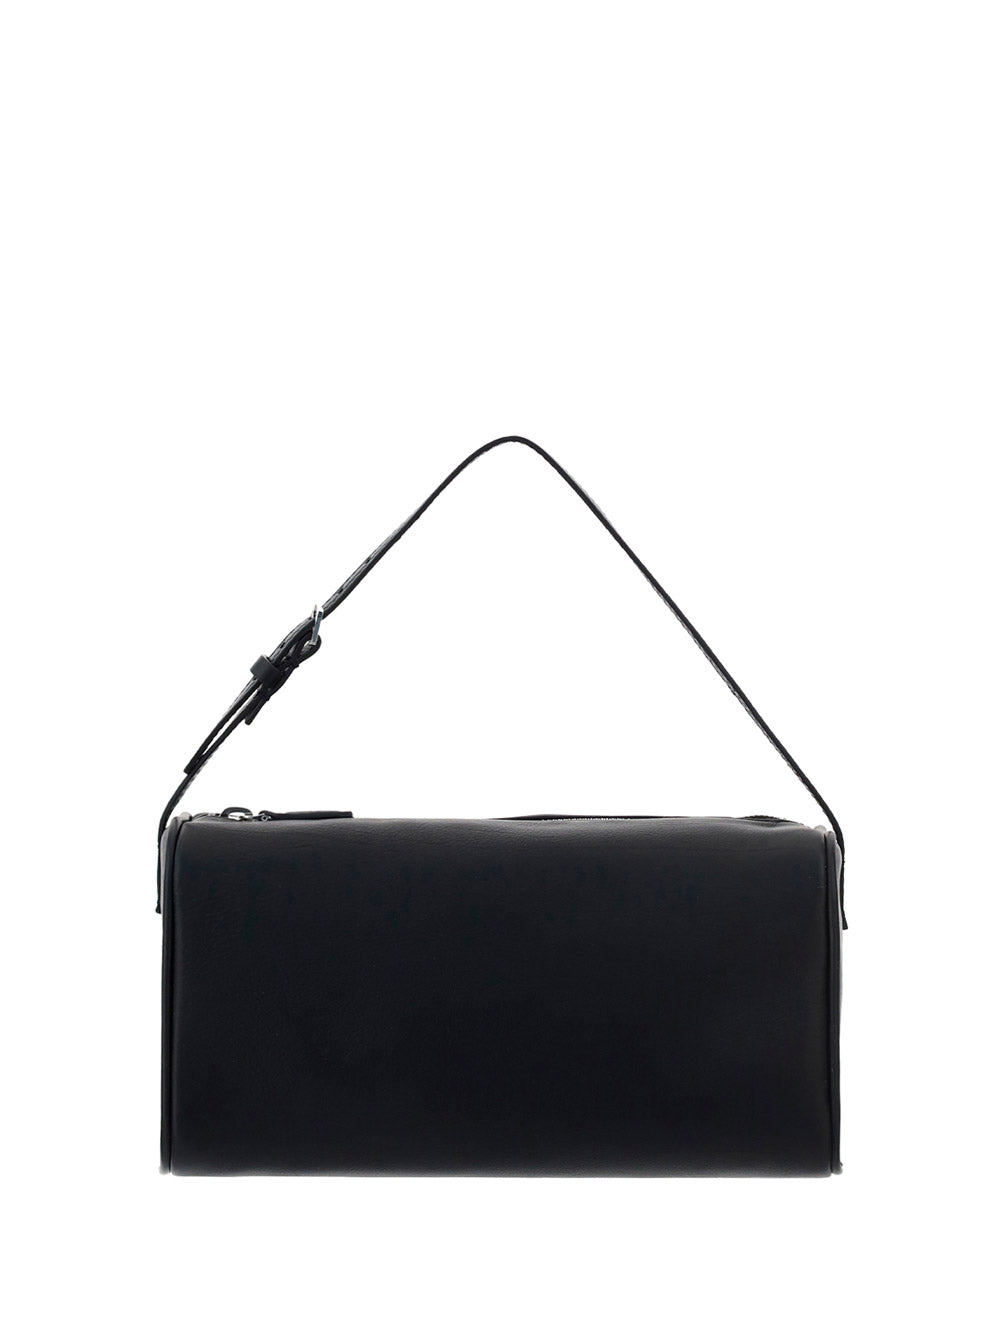 90's Bag in Leather - Black